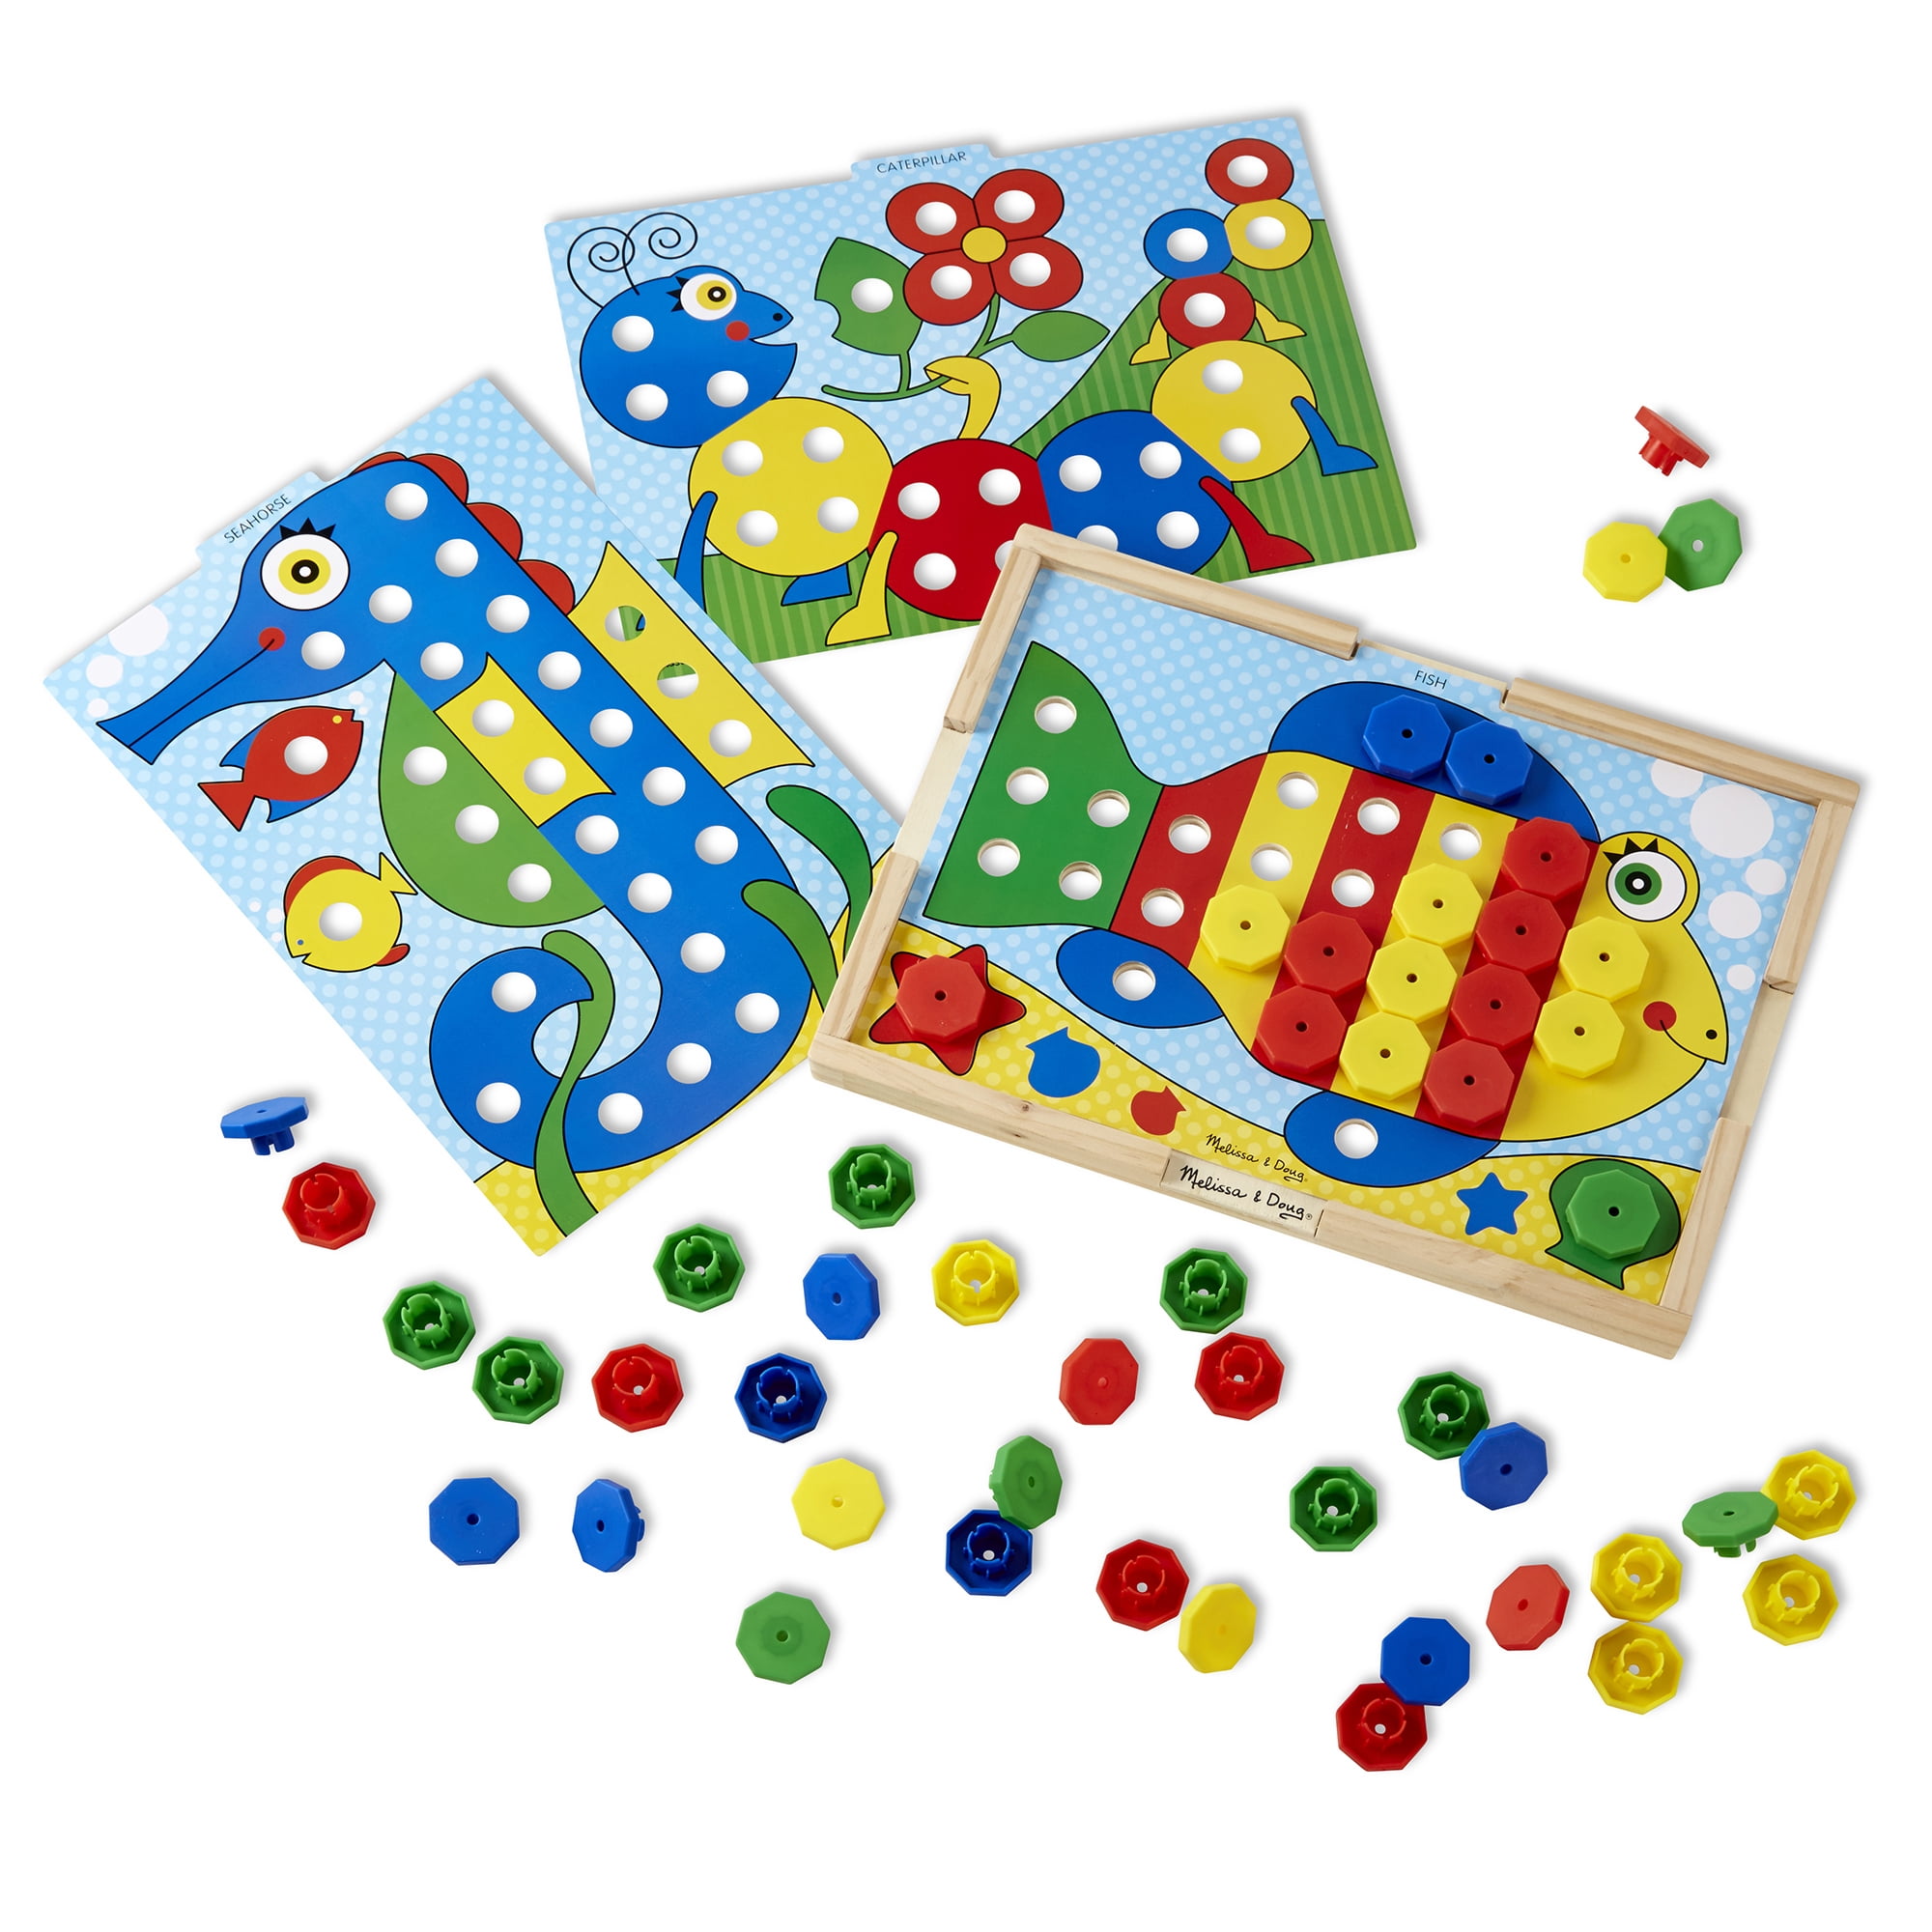 Melissa & Doug Sort and Snap Color Match Sorting and Patterns Educational Toy 